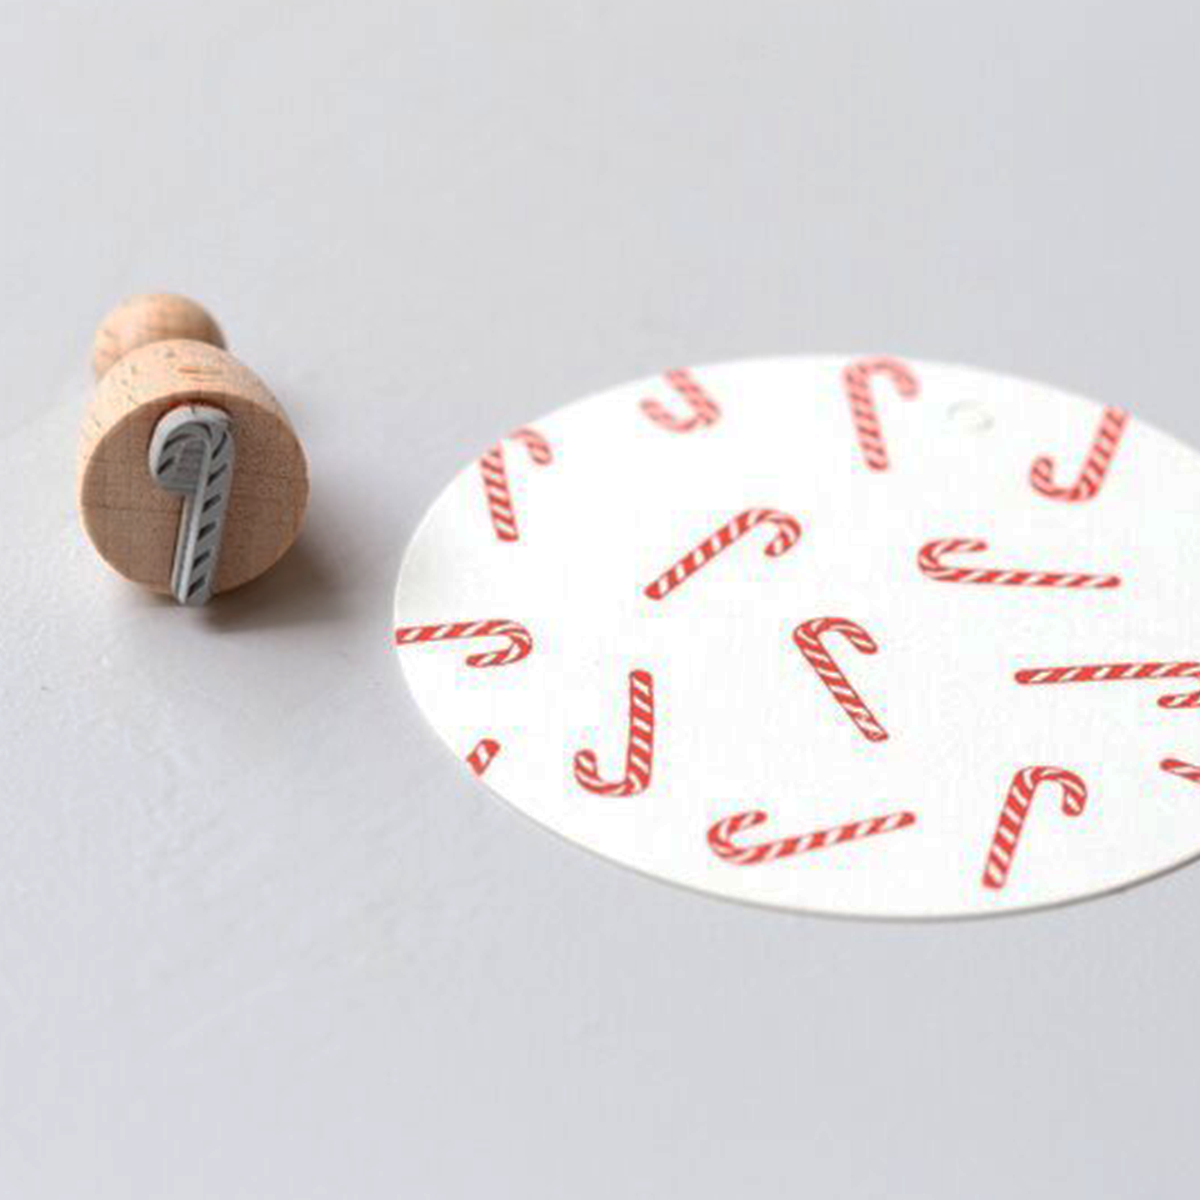 files/Rubberstamp_CandyCane_E117_02.png